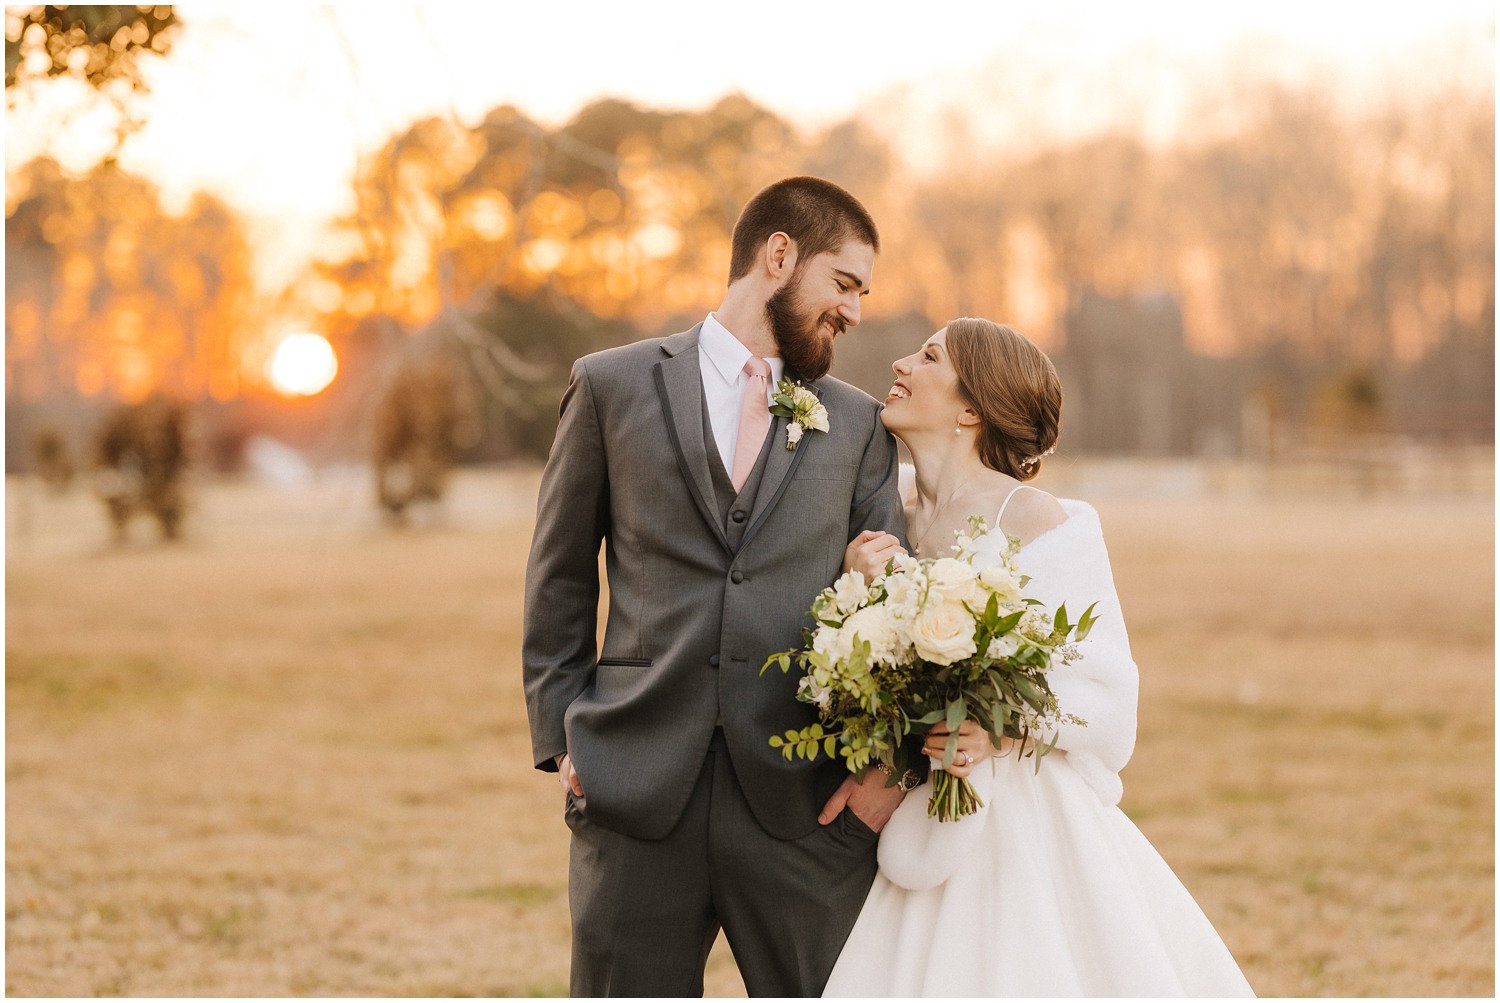 A couple smiles together at sunset on their wedding day at The Barn at Valhalla